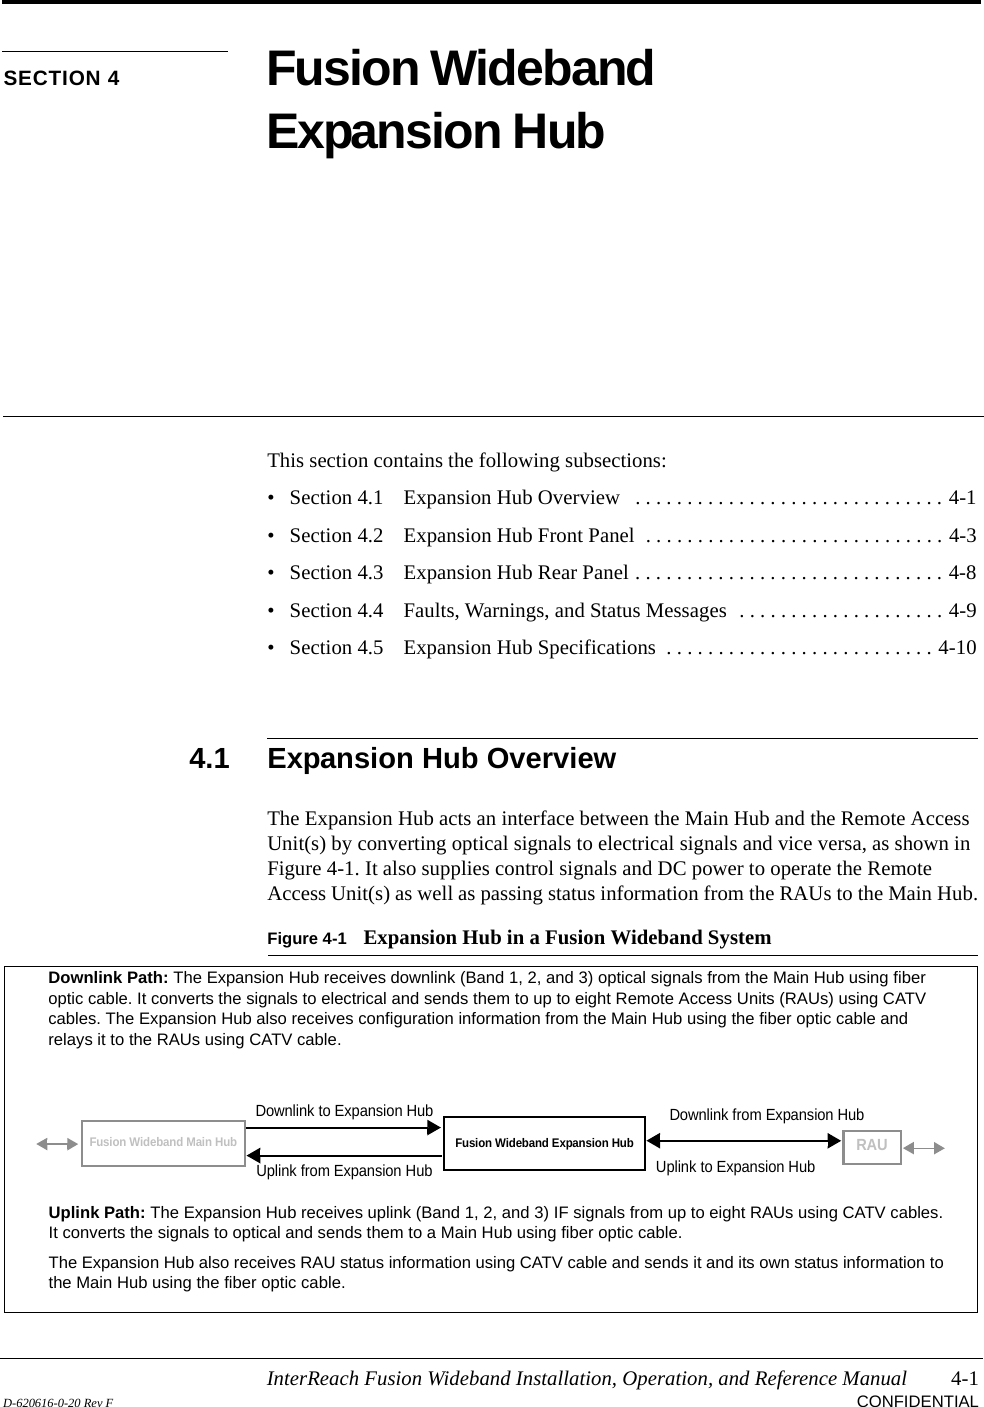 InterReach Fusion Wideband Installation, Operation, and Reference Manual 4-1D-620616-0-20 Rev F CONFIDENTIALSECTION 4 Fusion Wideband Expansion HubThis section contains the following subsections:• Section 4.1   Expansion Hub Overview   . . . . . . . . . . . . . . . . . . . . . . . . . . . . . . 4-1• Section 4.2   Expansion Hub Front Panel  . . . . . . . . . . . . . . . . . . . . . . . . . . . . . 4-3• Section 4.3   Expansion Hub Rear Panel . . . . . . . . . . . . . . . . . . . . . . . . . . . . . . 4-8• Section 4.4   Faults, Warnings, and Status Messages  . . . . . . . . . . . . . . . . . . . . 4-9• Section 4.5   Expansion Hub Specifications  . . . . . . . . . . . . . . . . . . . . . . . . . . 4-104.1 Expansion Hub OverviewThe Expansion Hub acts an interface between the Main Hub and the Remote Access Unit(s) by converting optical signals to electrical signals and vice versa, as shown in Figure 4-1. It also supplies control signals and DC power to operate the Remote Access Unit(s) as well as passing status information from the RAUs to the Main Hub.Figure 4-1 Expansion Hub in a Fusion Wideband SystemFusion Wideband Expansion HubFusion Wideband Main HubRAUDownlink Path: The Expansion Hub receives downlink (Band 1, 2, and 3) optical signals from the Main Hub using fiber optic cable. It converts the signals to electrical and sends them to up to eight Remote Access Units (RAUs) using CATV cables. The Expansion Hub also receives configuration information from the Main Hub using the fiber optic cable and relays it to the RAUs using CATV cable.Uplink Path: The Expansion Hub receives uplink (Band 1, 2, and 3) IF signals from up to eight RAUs using CATV cables. It converts the signals to optical and sends them to a Main Hub using fiber optic cable.The Expansion Hub also receives RAU status information using CATV cable and sends it and its own status information to the Main Hub using the fiber optic cable.Downlink to Expansion HubUplink from Expansion HubDownlink from Expansion HubUplink to Expansion Hub